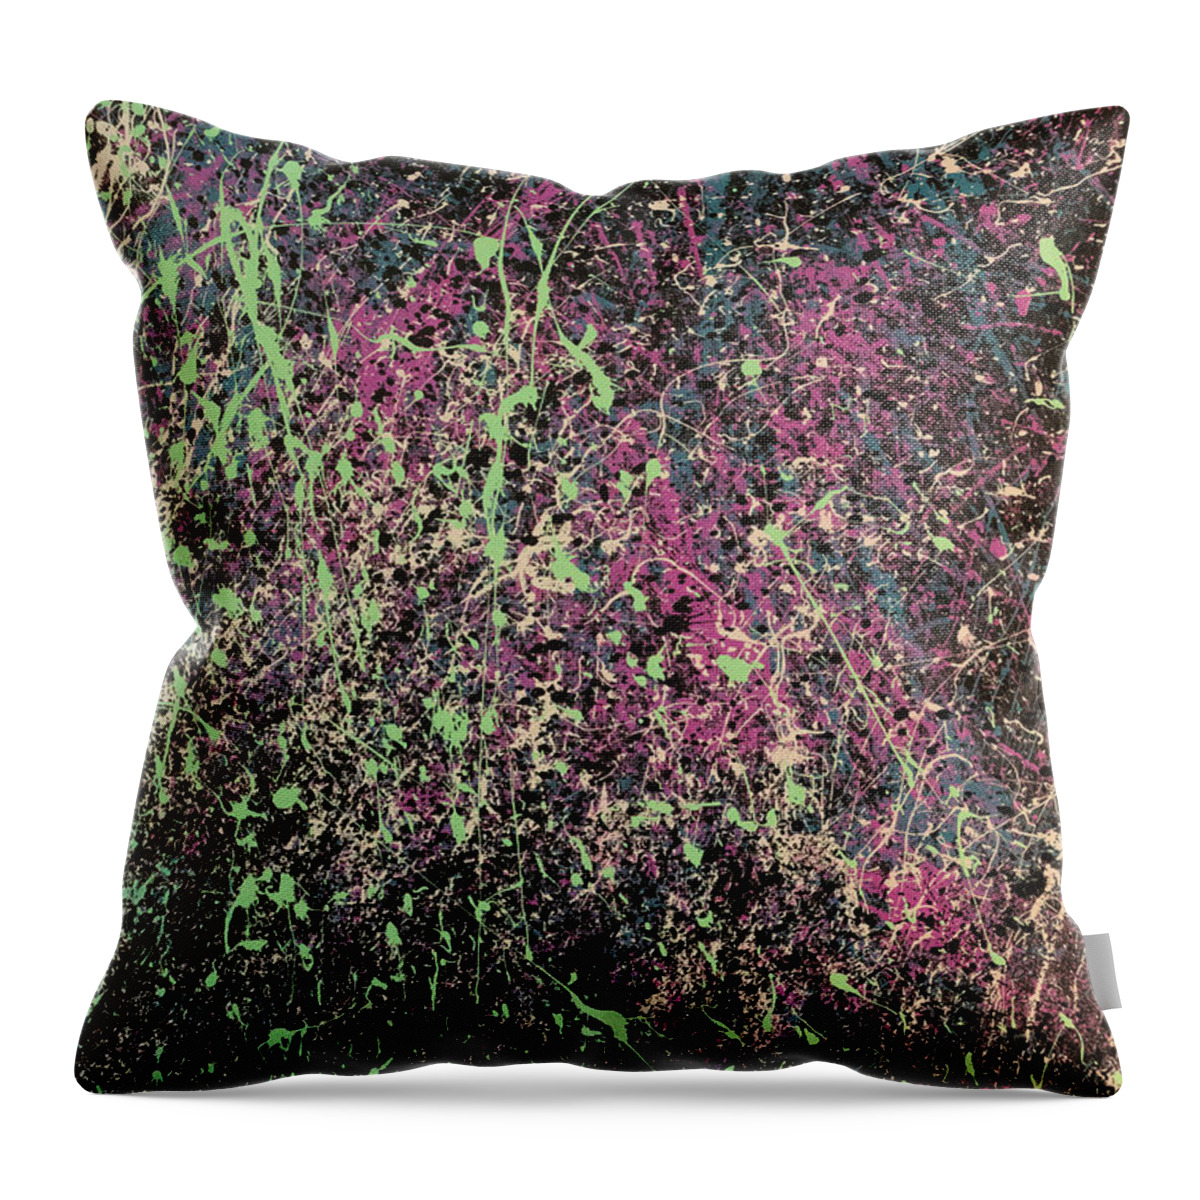 Abstract Throw Pillow featuring the painting Awakening by Heather Meglasson Impact Artist